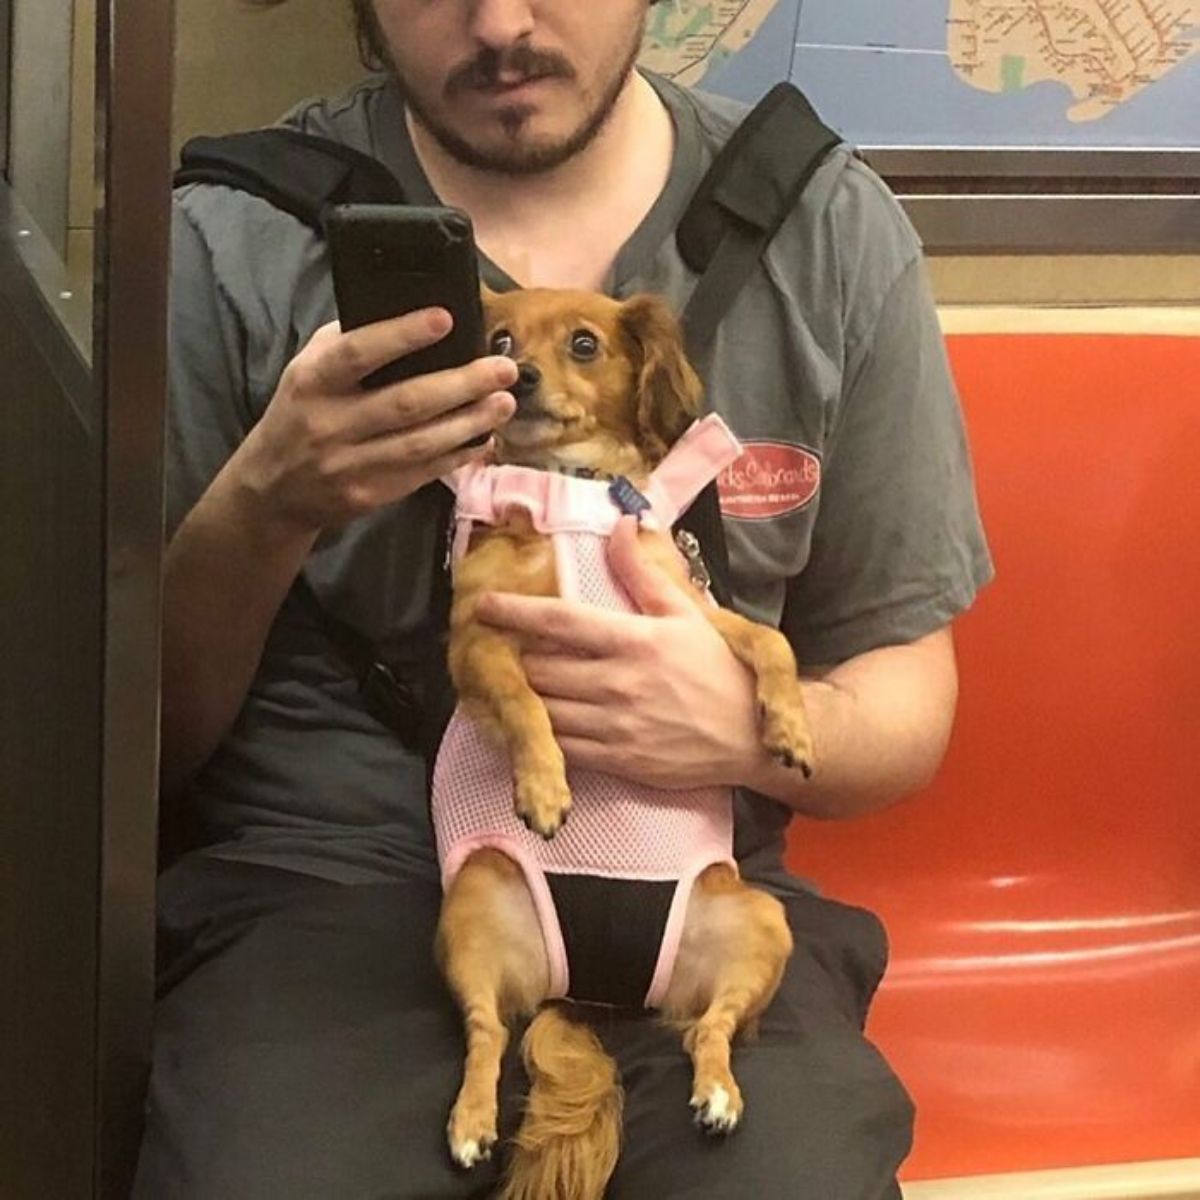 small brown dog in a pink harness being held by a person at the front